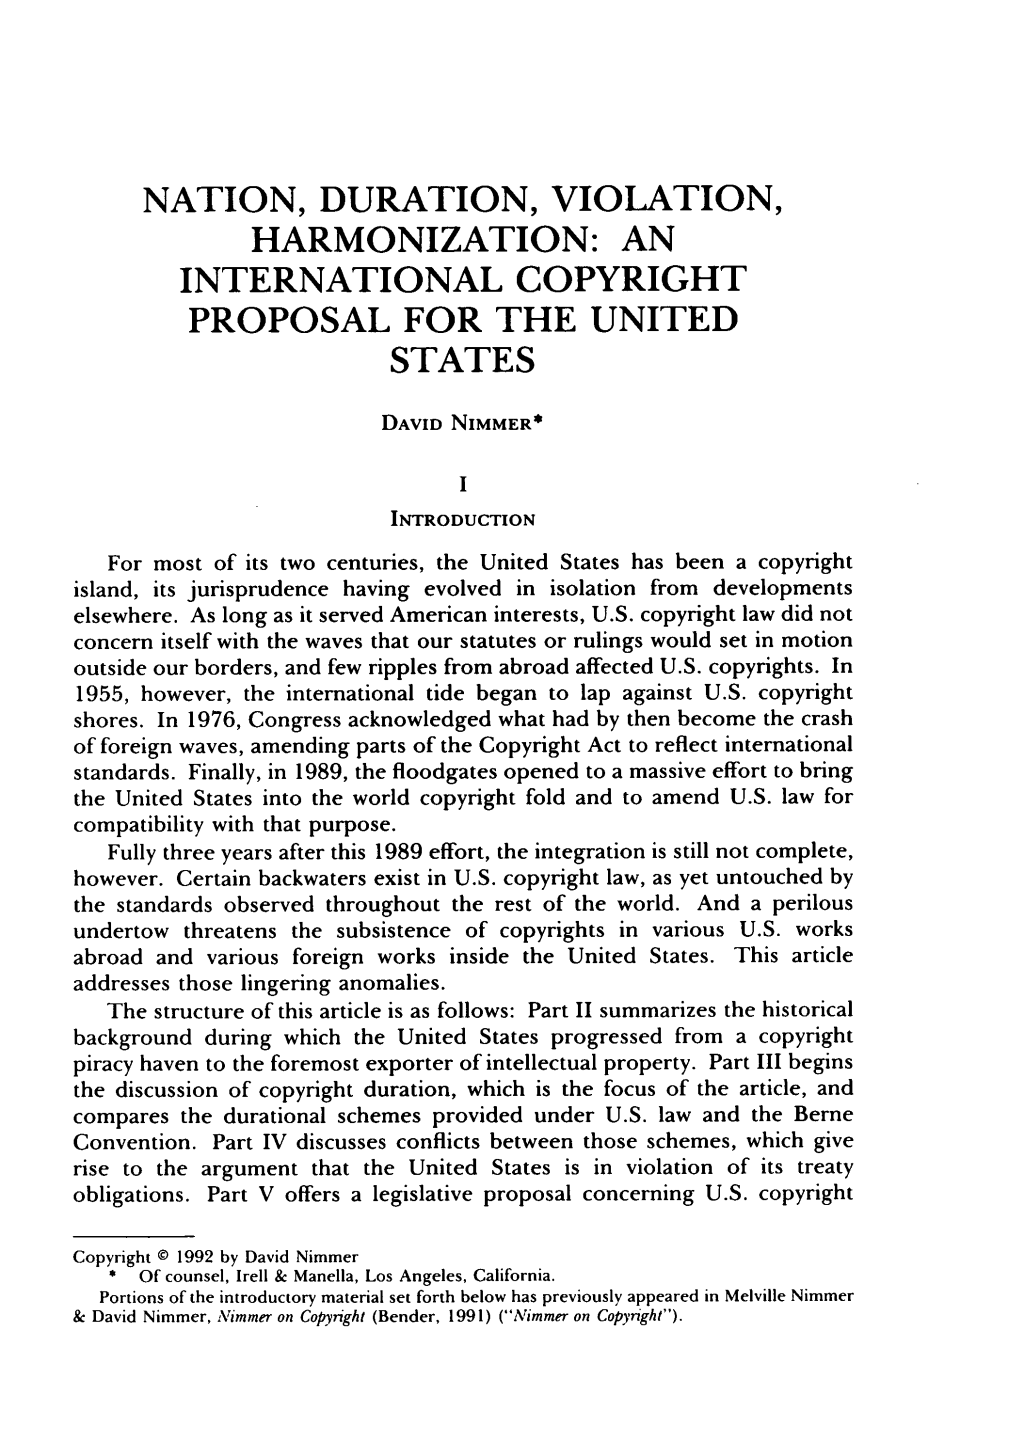 An International Copyright Proposal for the United States